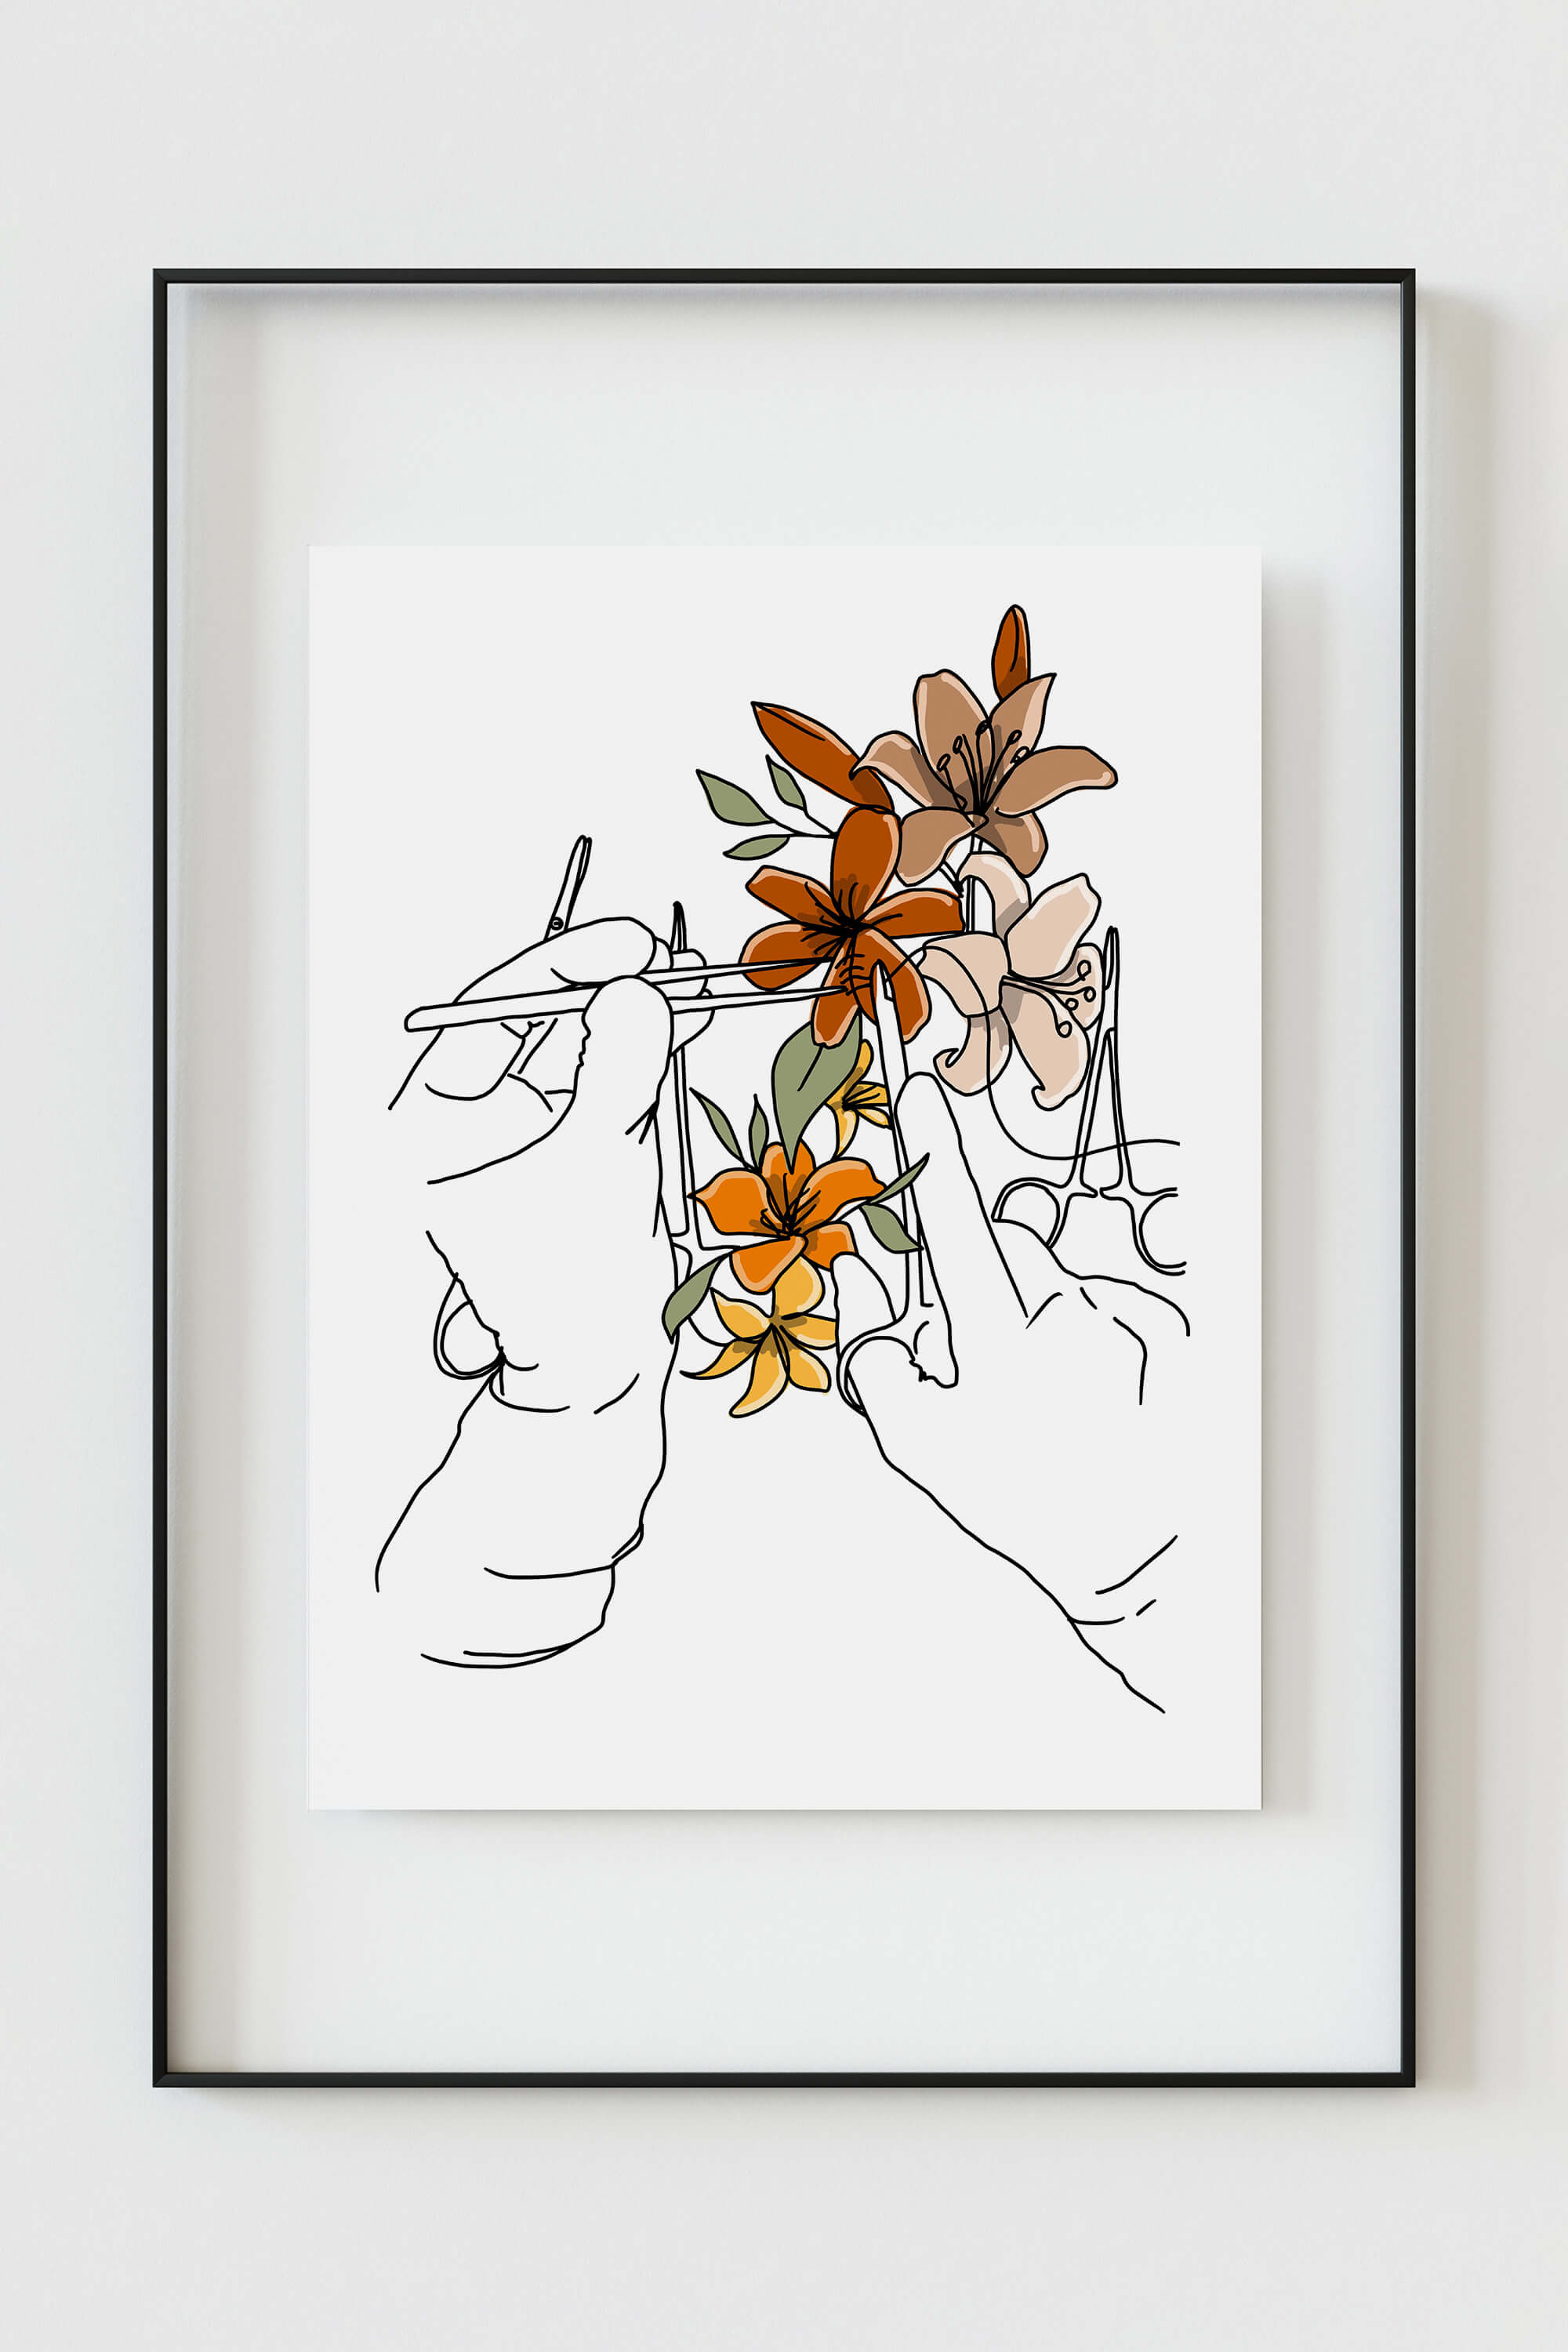 Transform your space with this floral beauty. This art print features a mesmerizing blend of delicate flowers, symbolizing healing and renewal. The perfect addition to medical offices or recovery spaces, creating an atmosphere of tranquility for both professionals and patients.